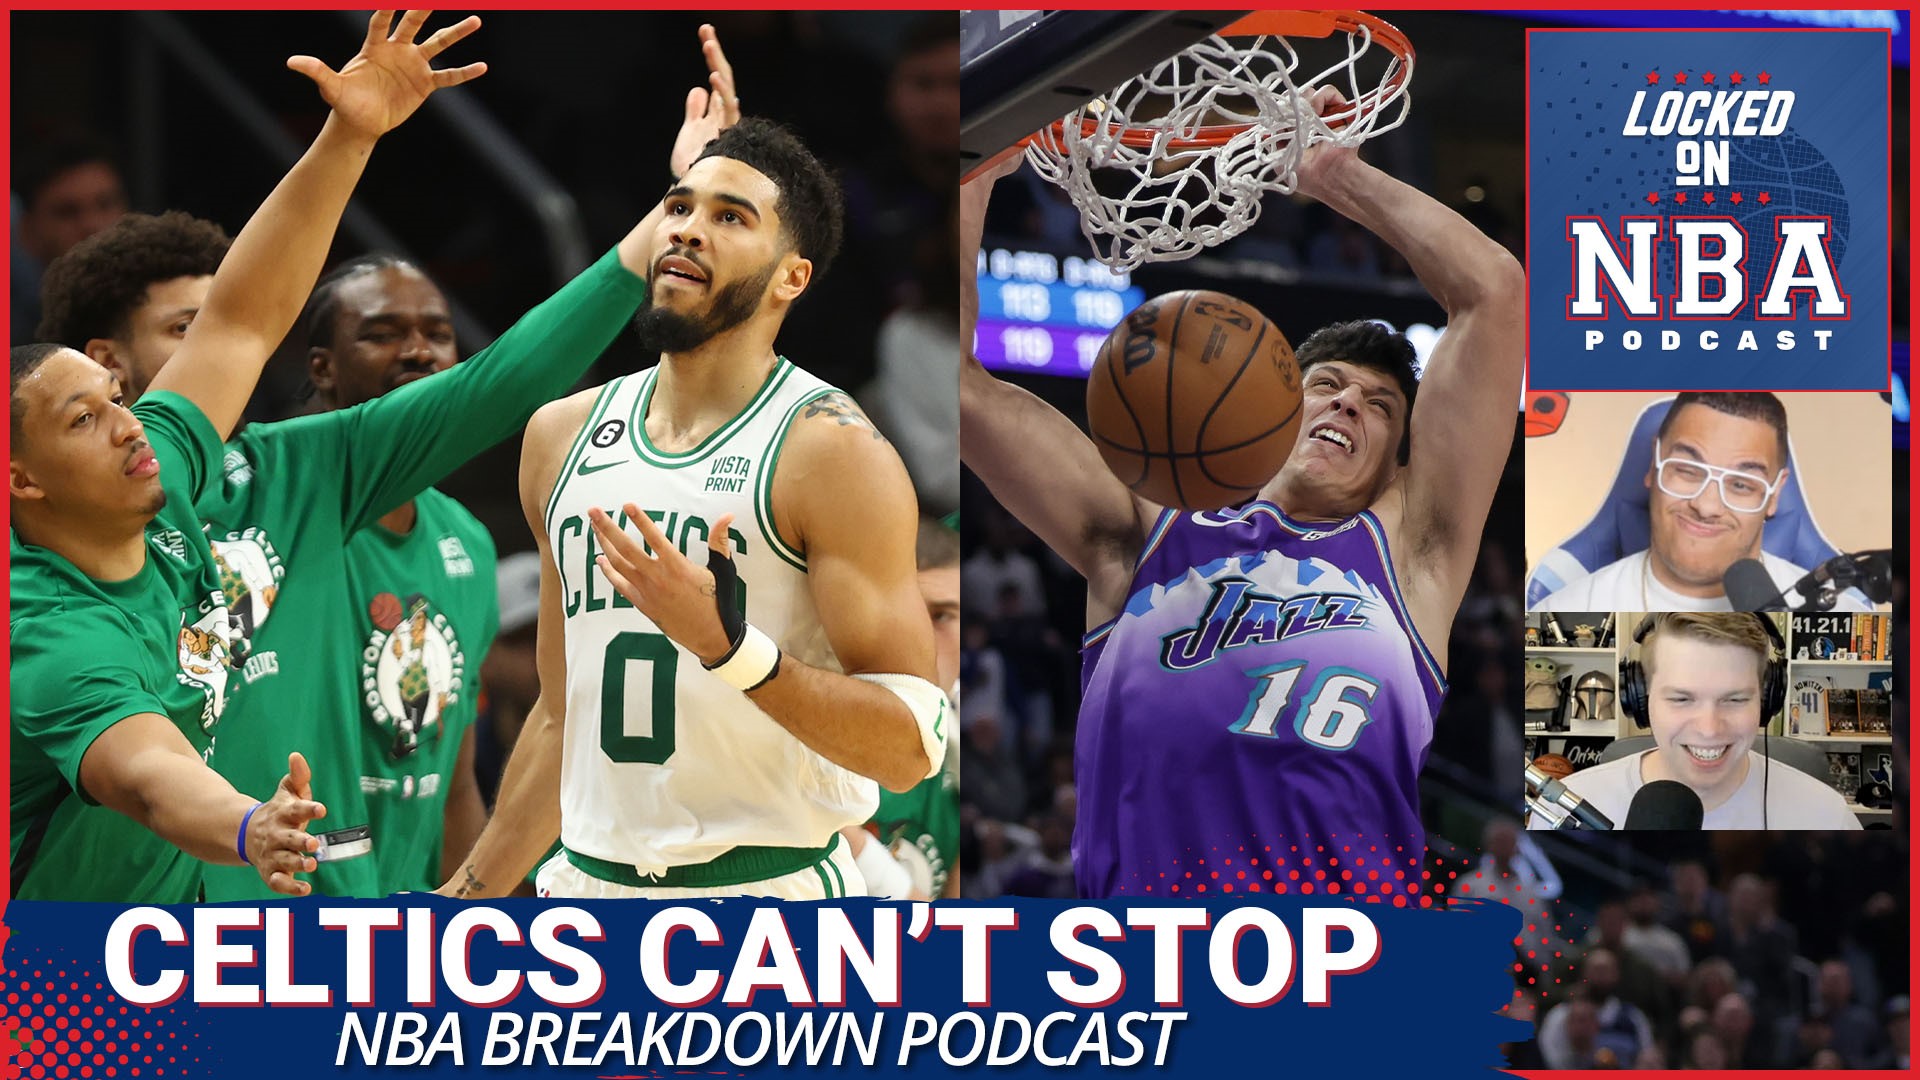 Nick Angstadt & PatTheDesigner breakdown the night in the NBA. How did the Celtics beat the Suns that badly? How good is Boston?